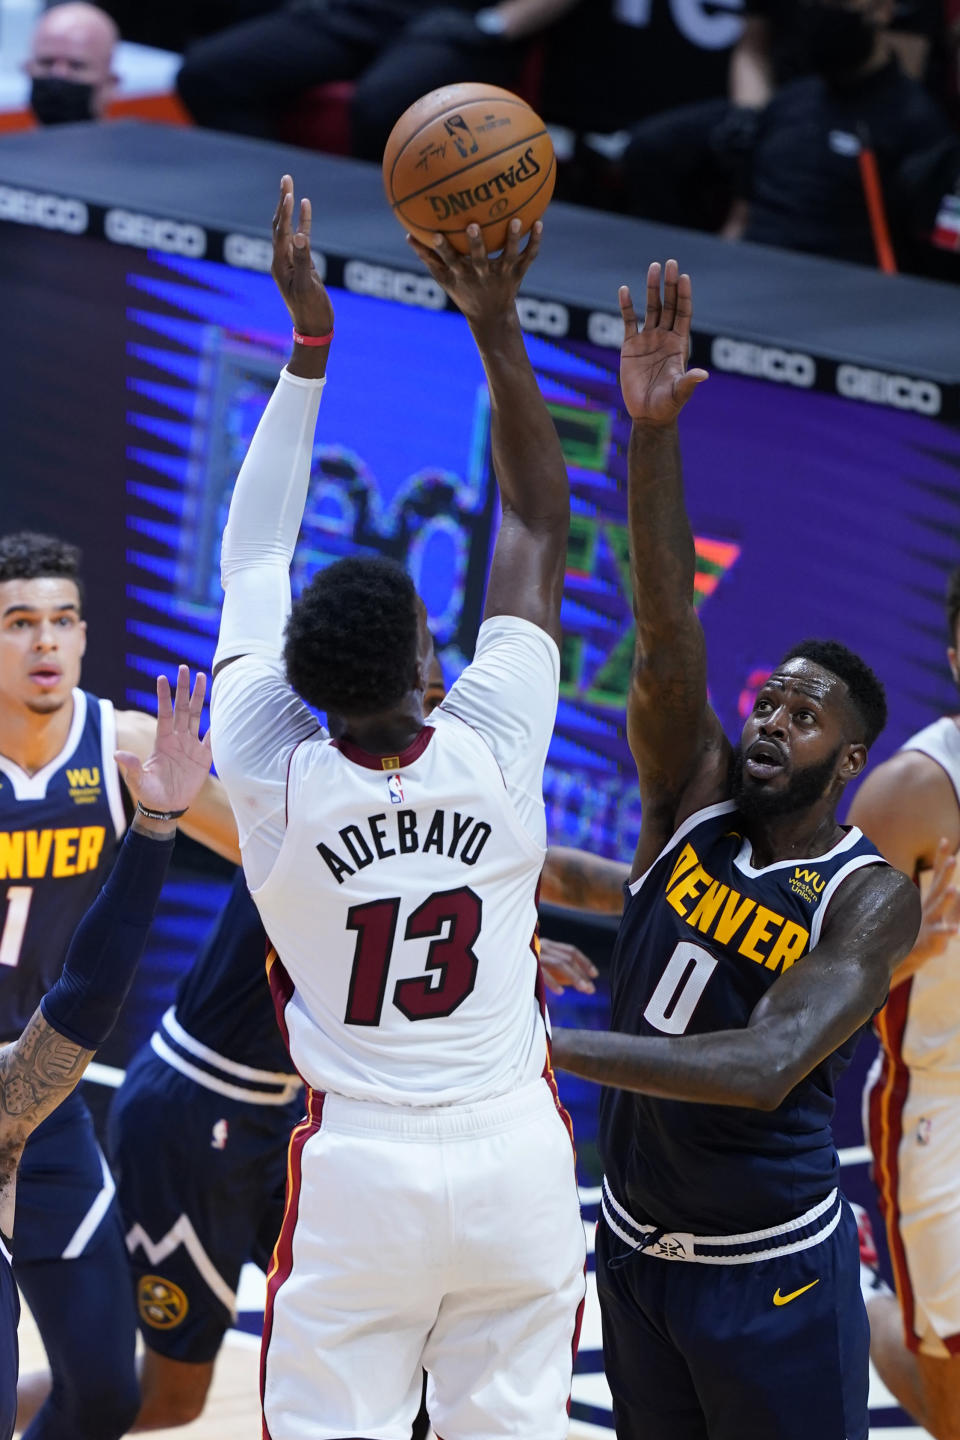 Miami Heat center Bam Adebayo (13) aims for a basket as Denver Nuggets forward JaMychal Green (0) defends during the first half of an NBA basketball game, Wednesday, Jan. 27, 2021, in Miami. (AP Photo/Marta Lavandier)